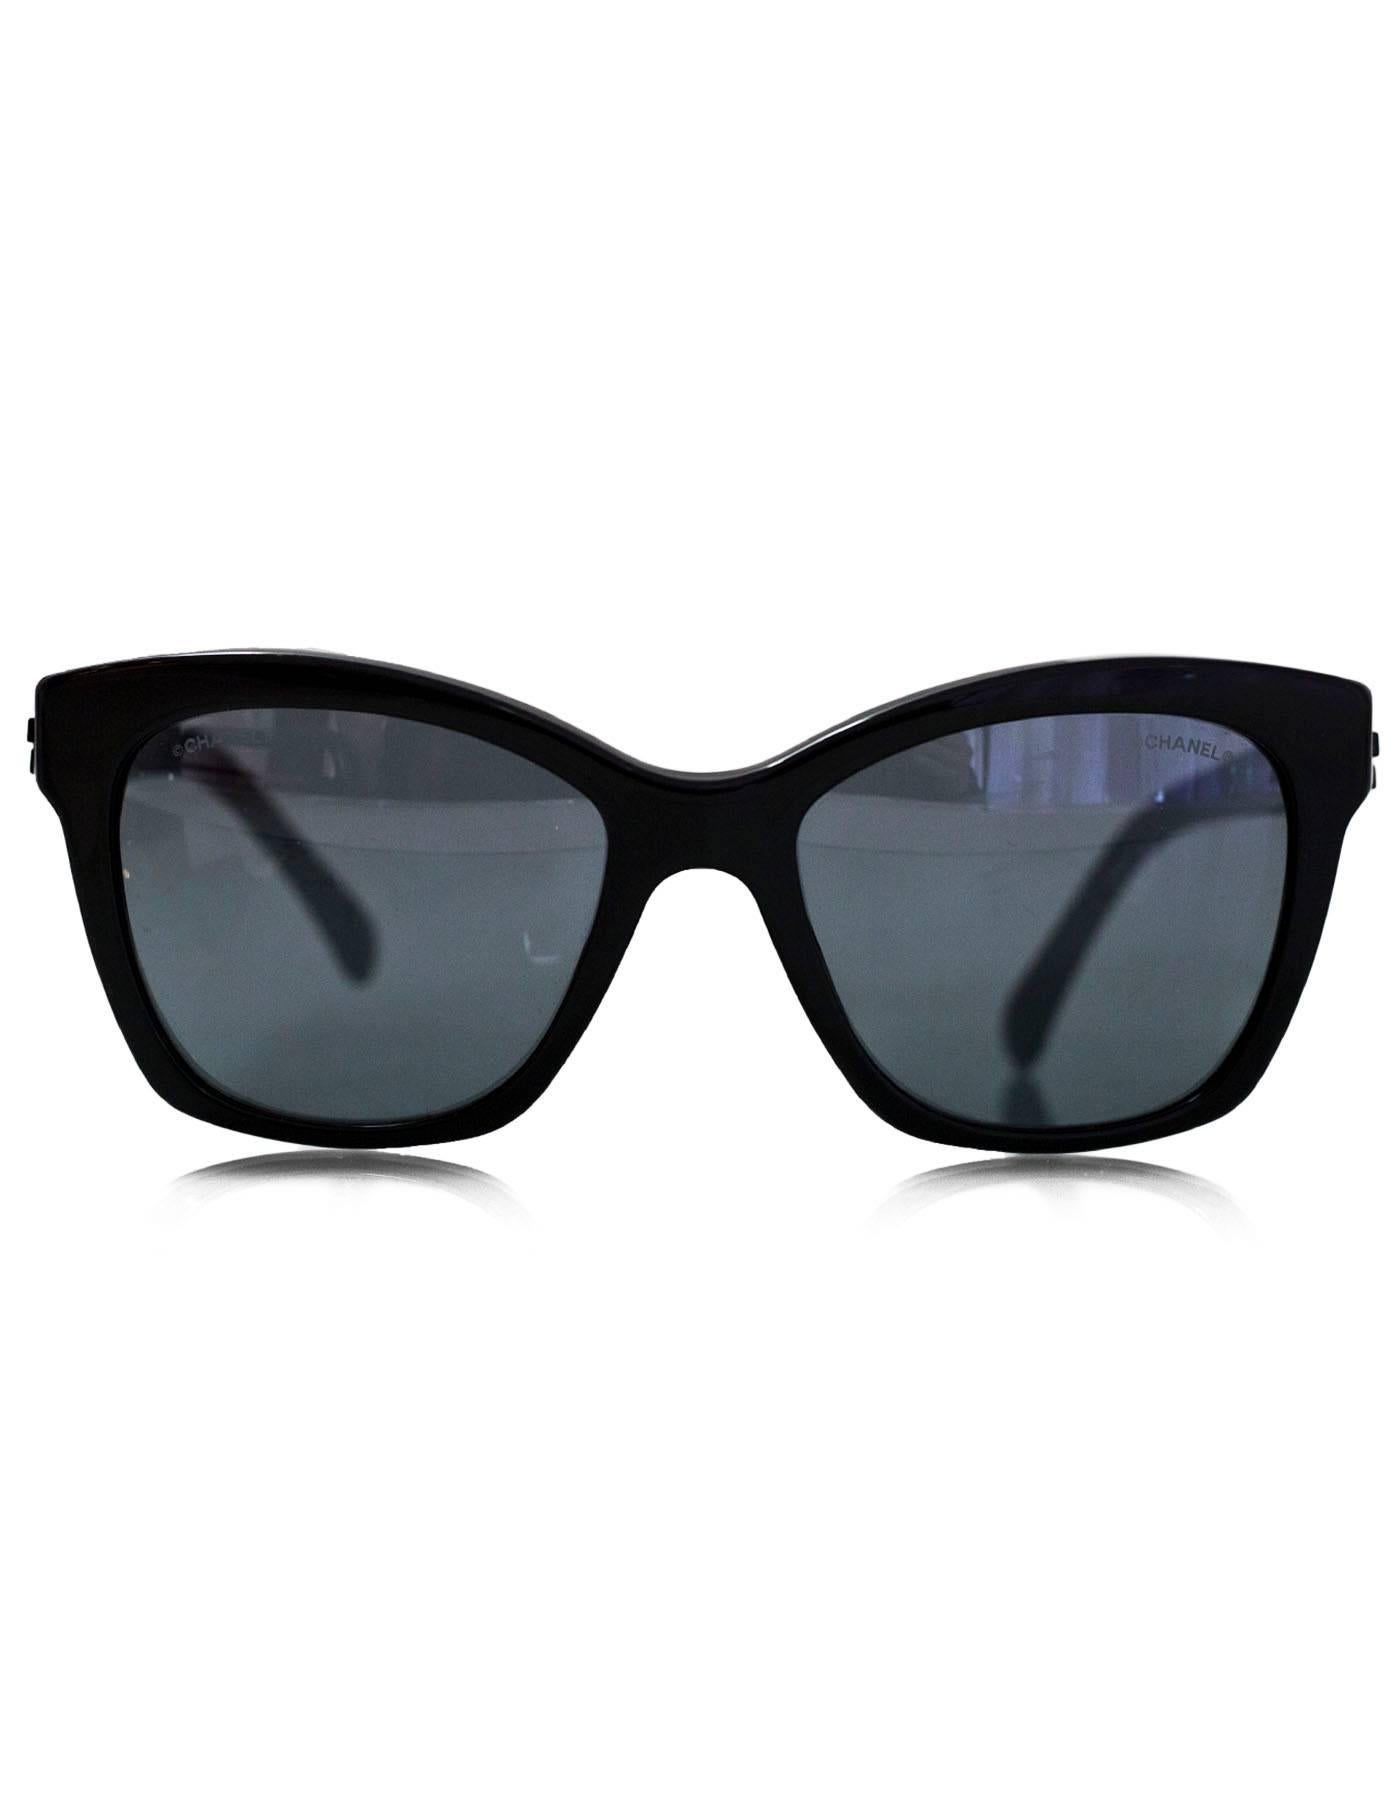 chanel butterfly spring sunglasses